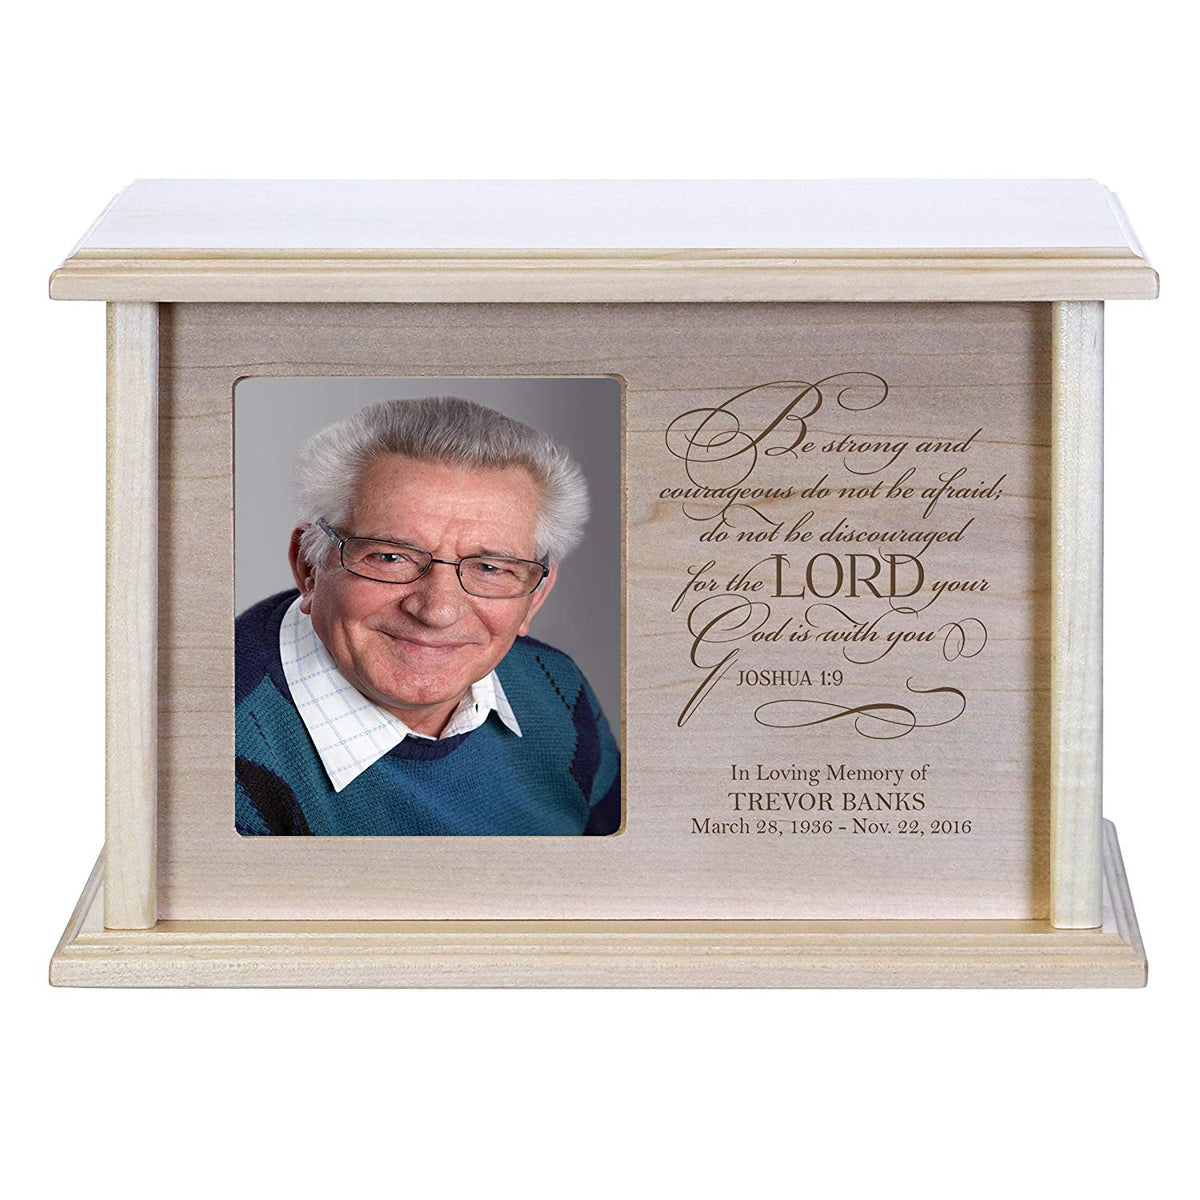 Custom Engraved Solid Wood Cremation Urn Box with 4x6 Photo holds 200 cu in of Human Ashes Be Strong and Courageous - LifeSong Milestones